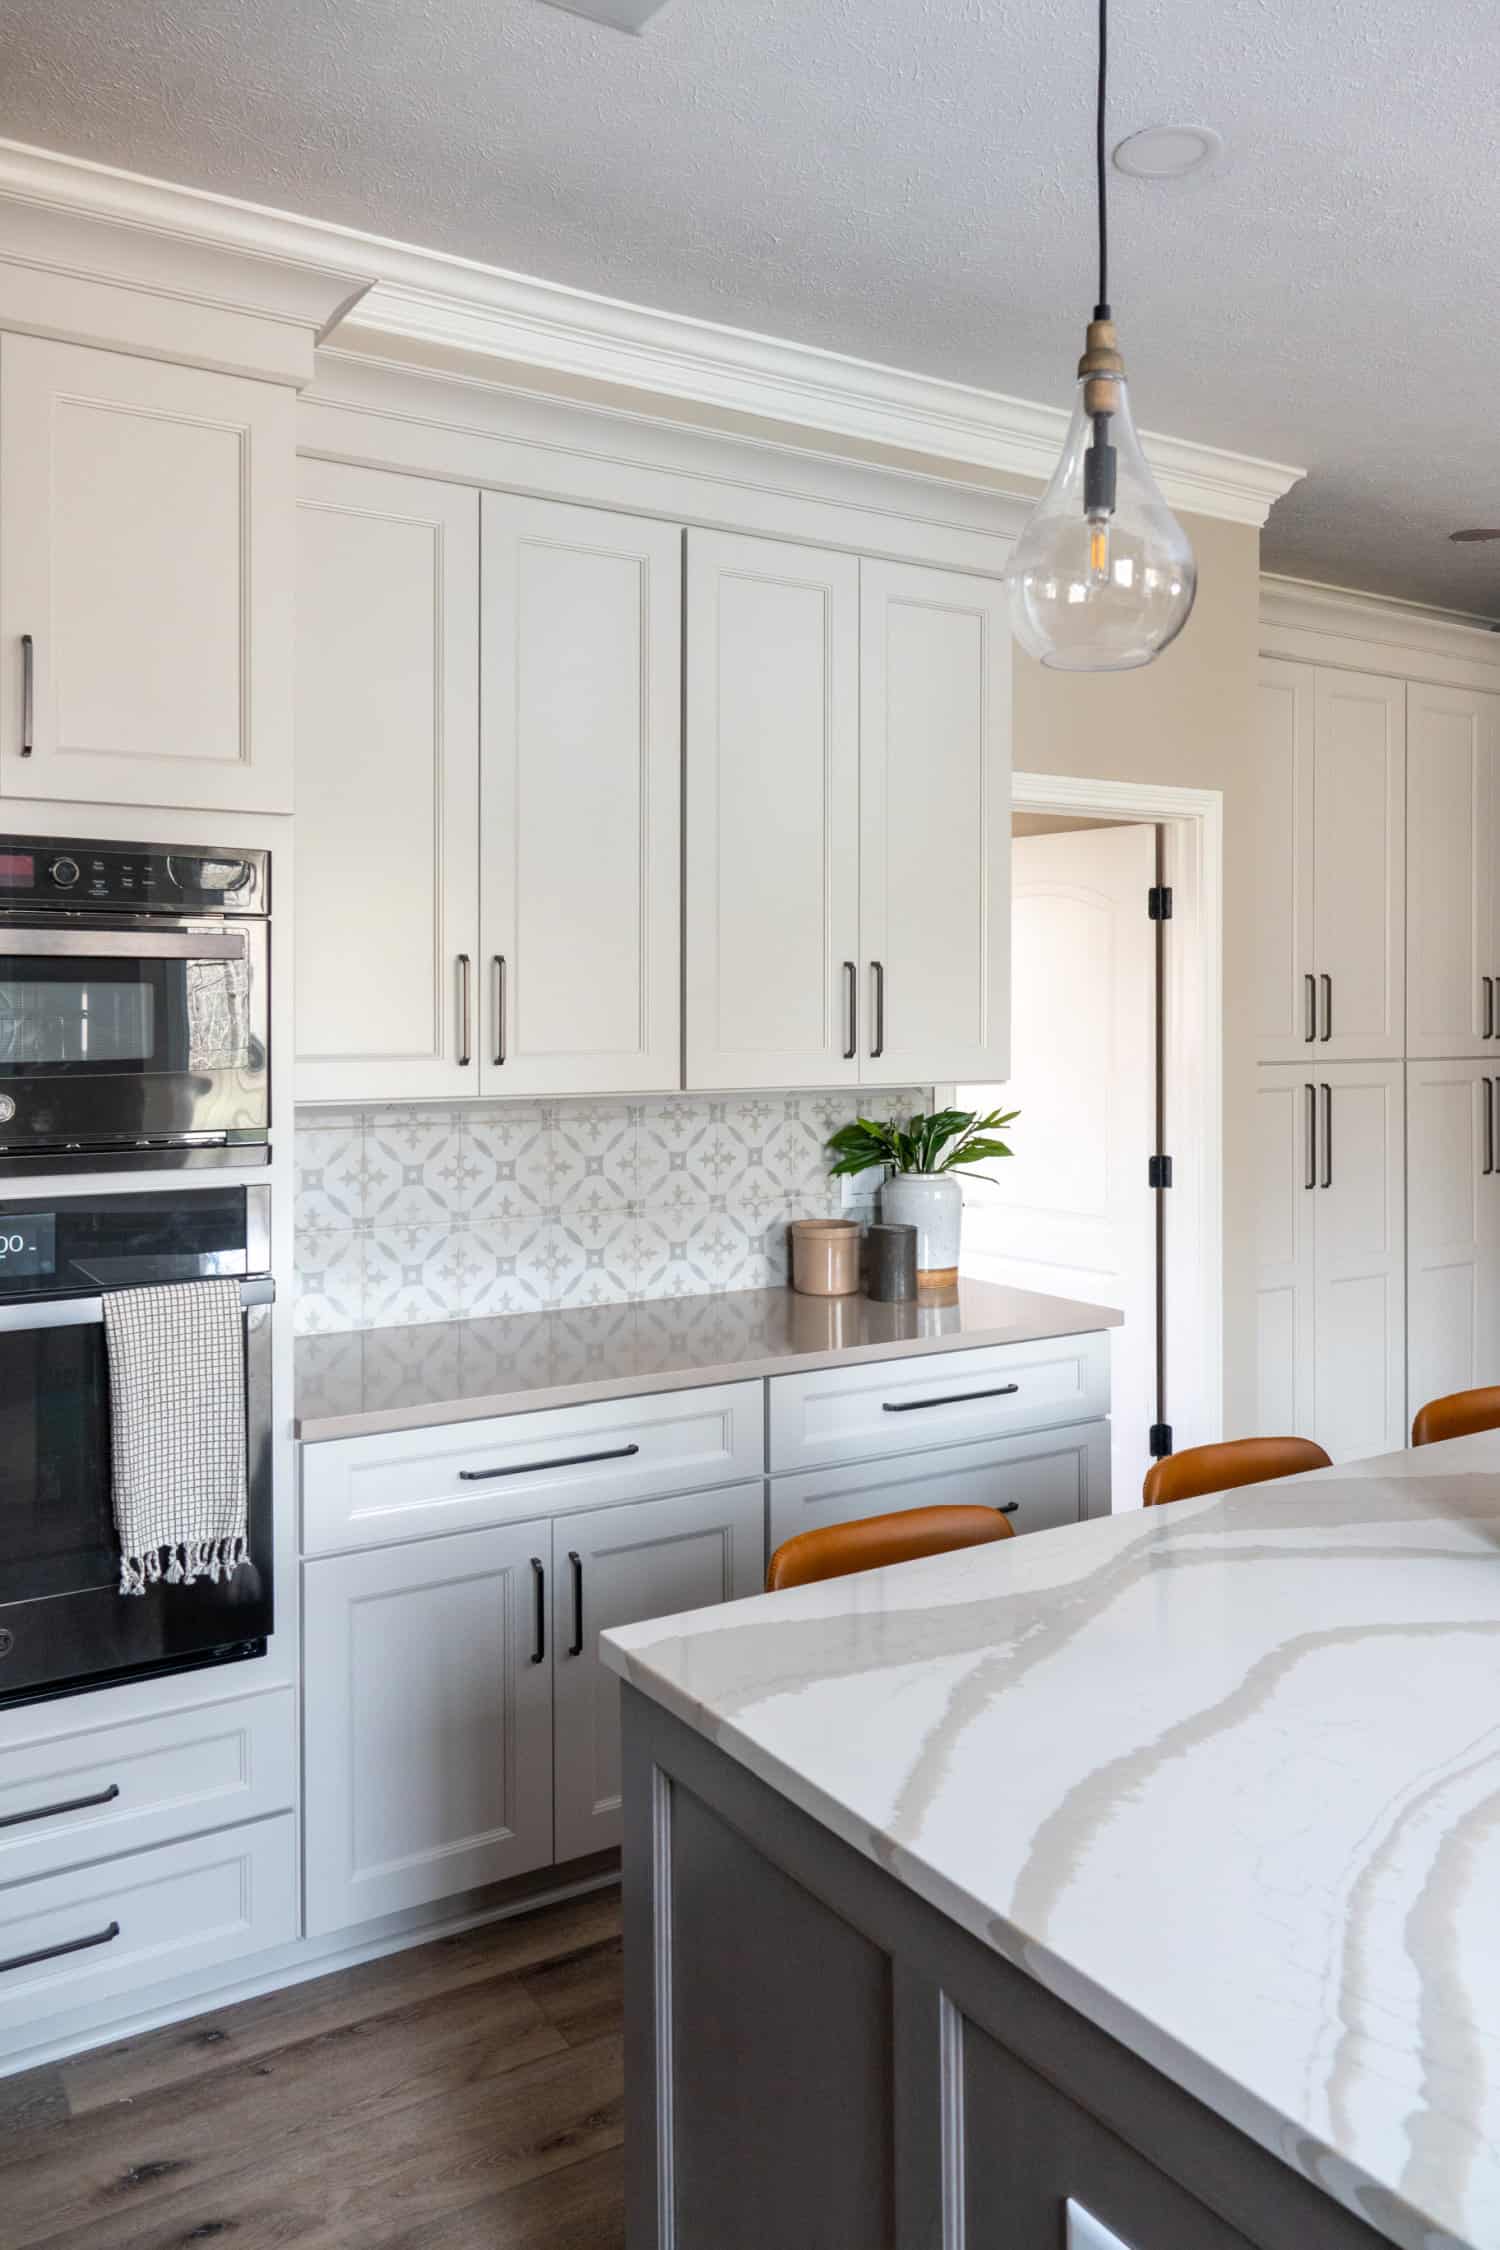 Nicholas Design Build | A remodel of a kitchen with white cabinets and marble counter tops.